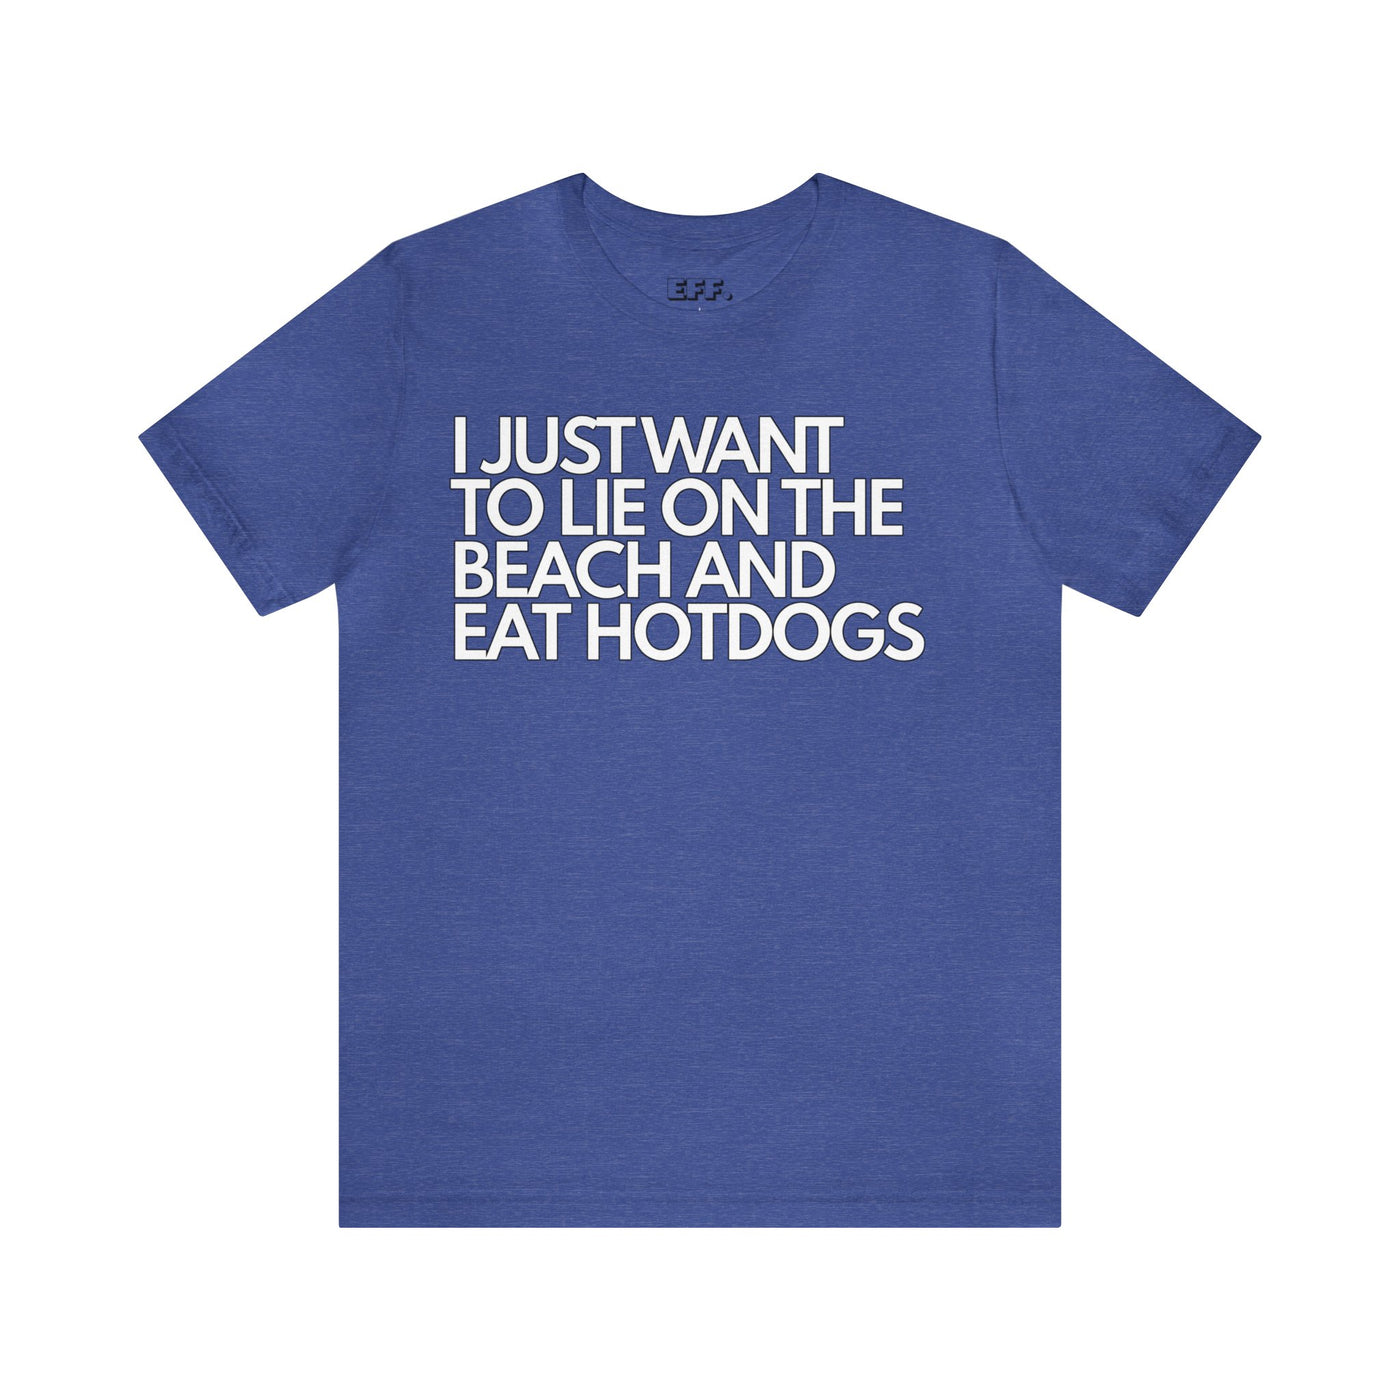 I Just Want To Lie On The Beach And Eat Hotdogs